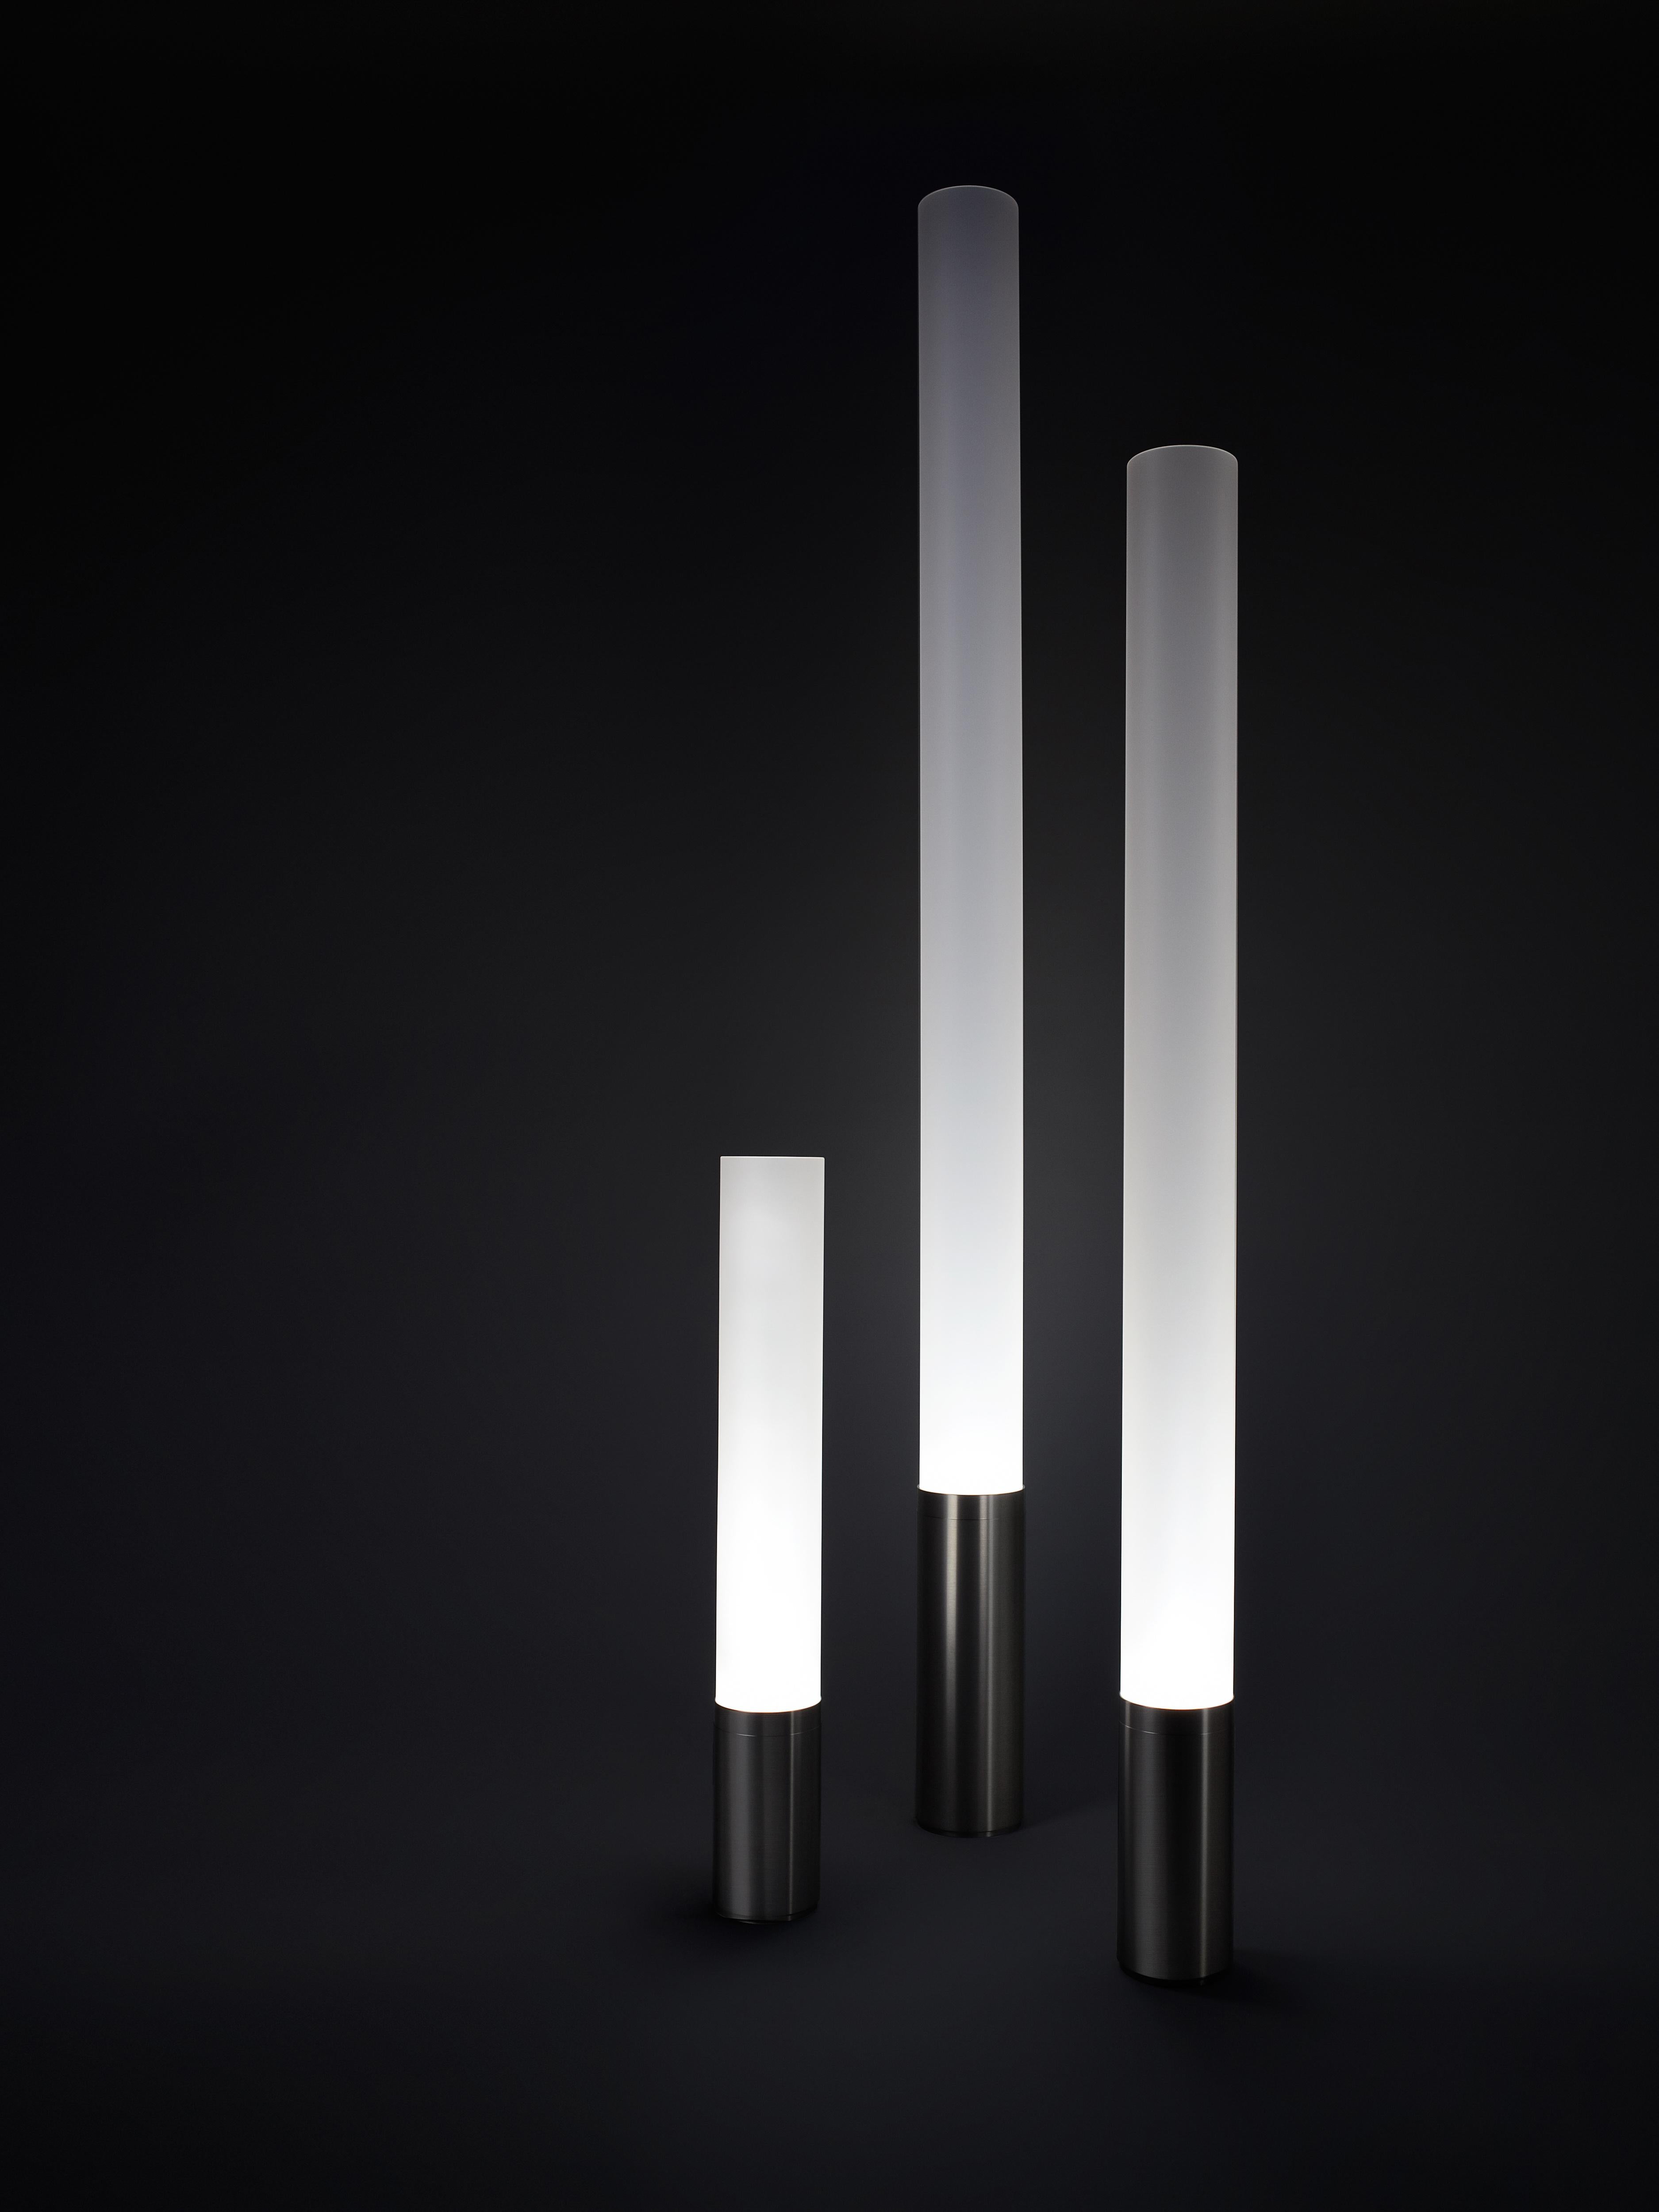 The timeless Elise lamp pays tribute to the advent of the machine age. Its refined machined aluminum base combined with its towering frosted acrylic diffuser serves as the perfect combination for elegant lighting. Elise features full-range dimming